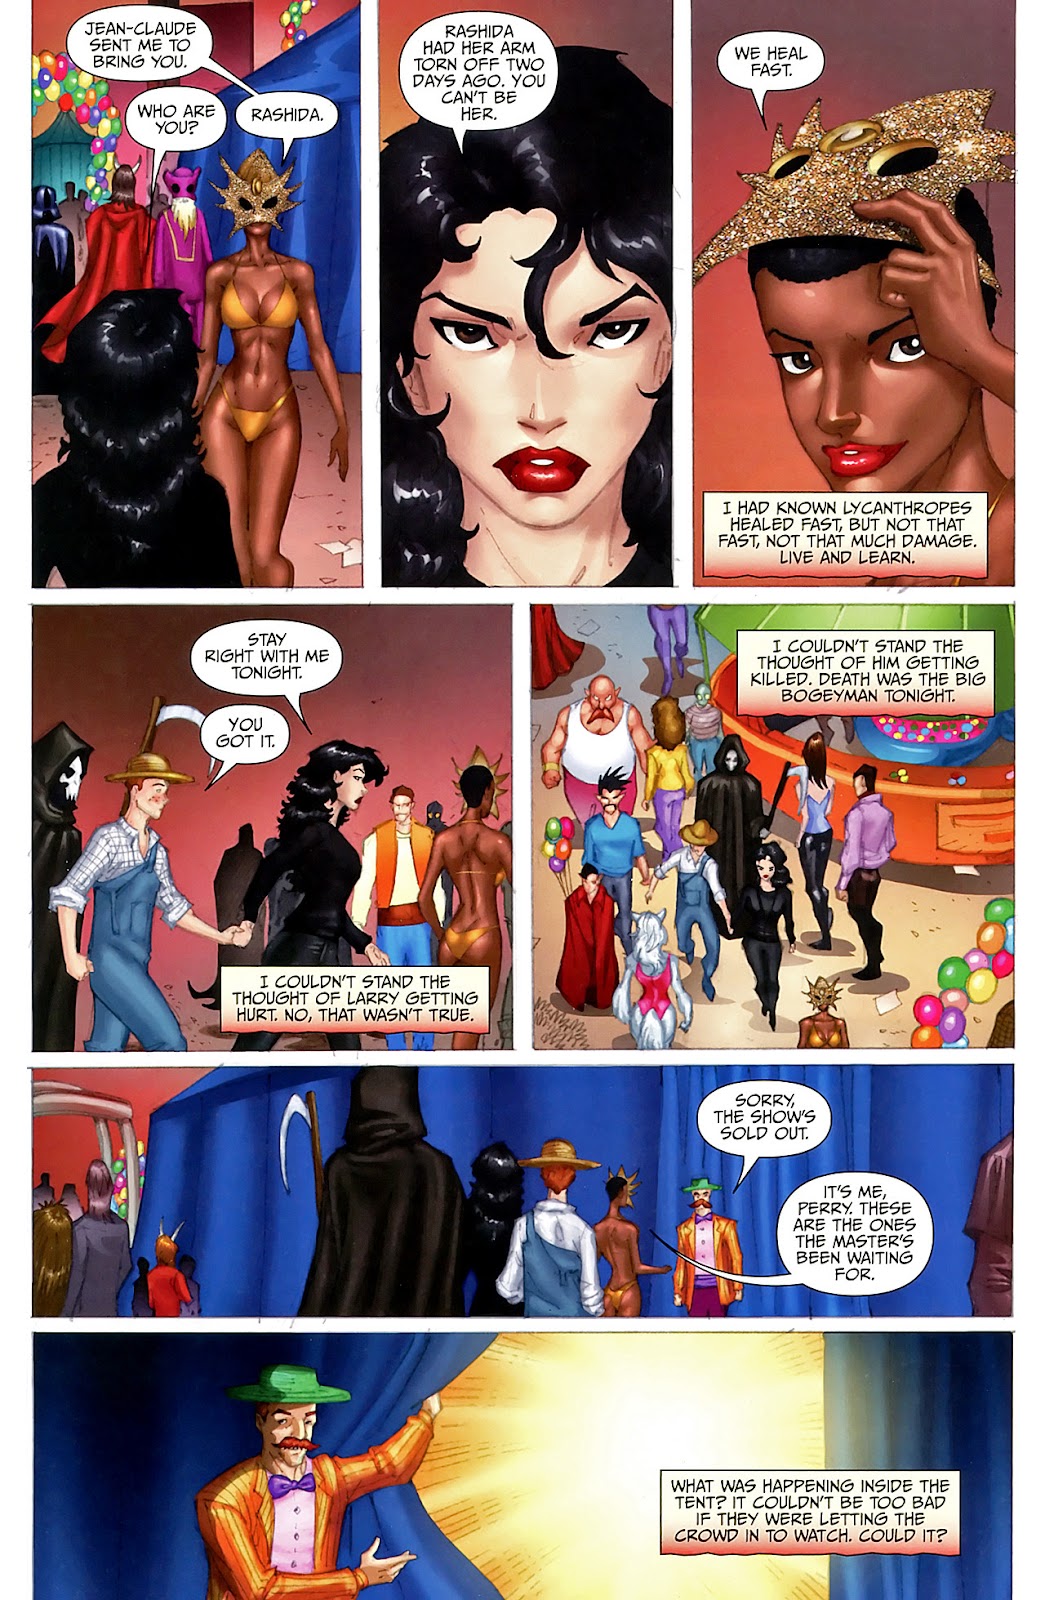 Anita Blake, Vampire Hunter: Circus of the Damned - The Scoundrel issue 4 - Page 9